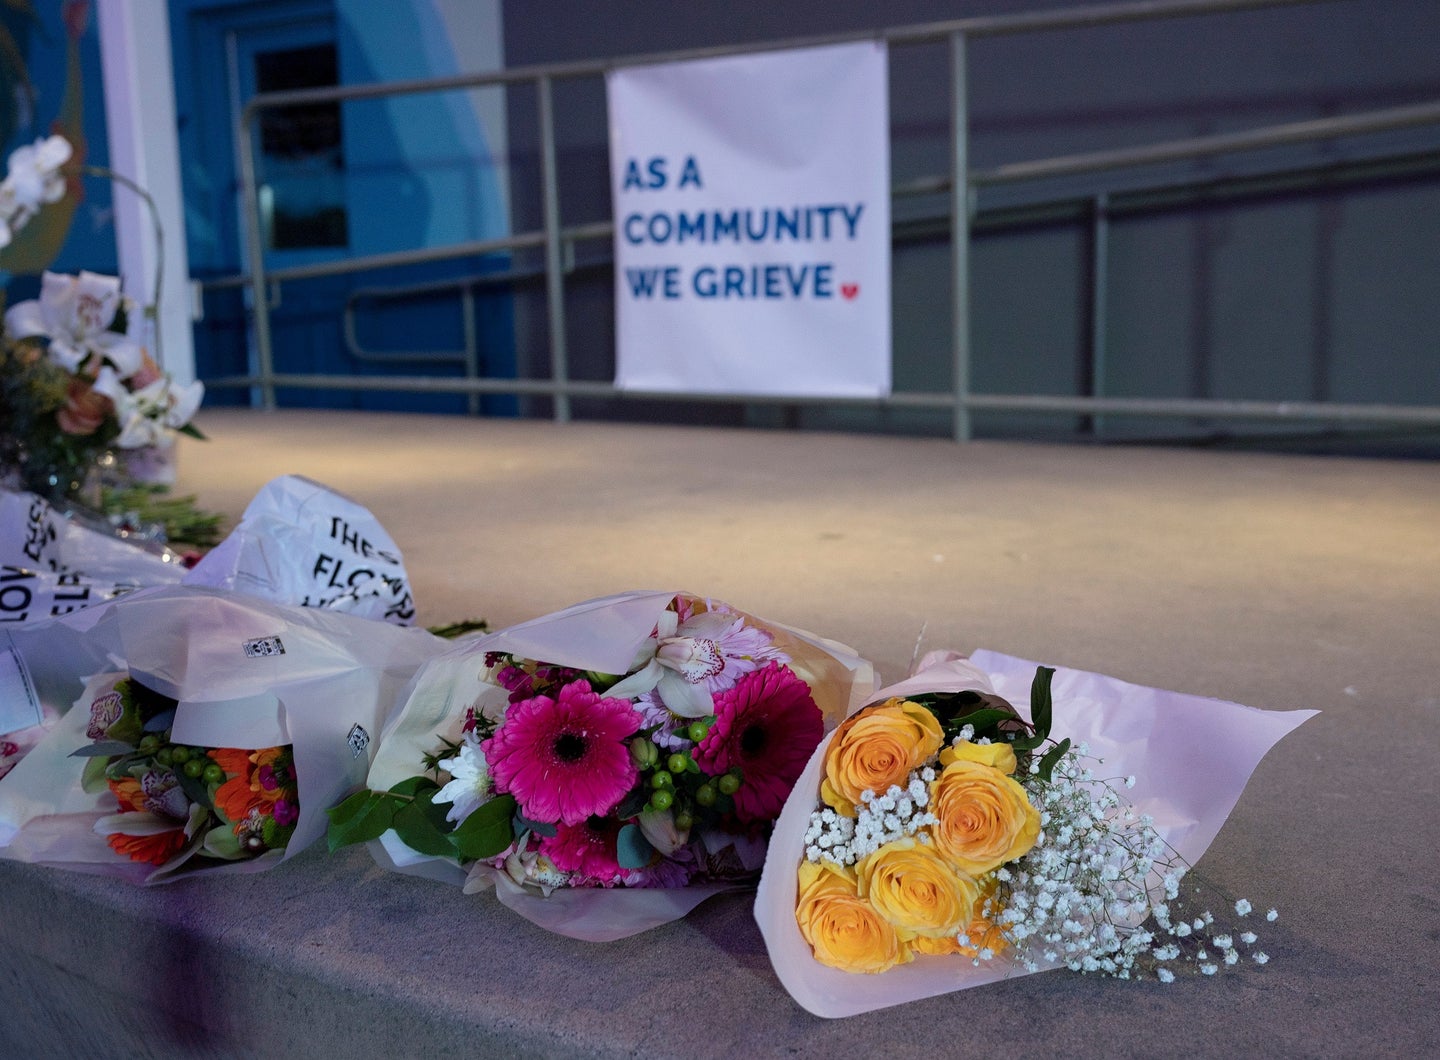 Yellow, red, and white roses left at a memorial for the victims of the Half Moon Bay mass shooting. A white sign behind the bouquets says "as a community we grieve."